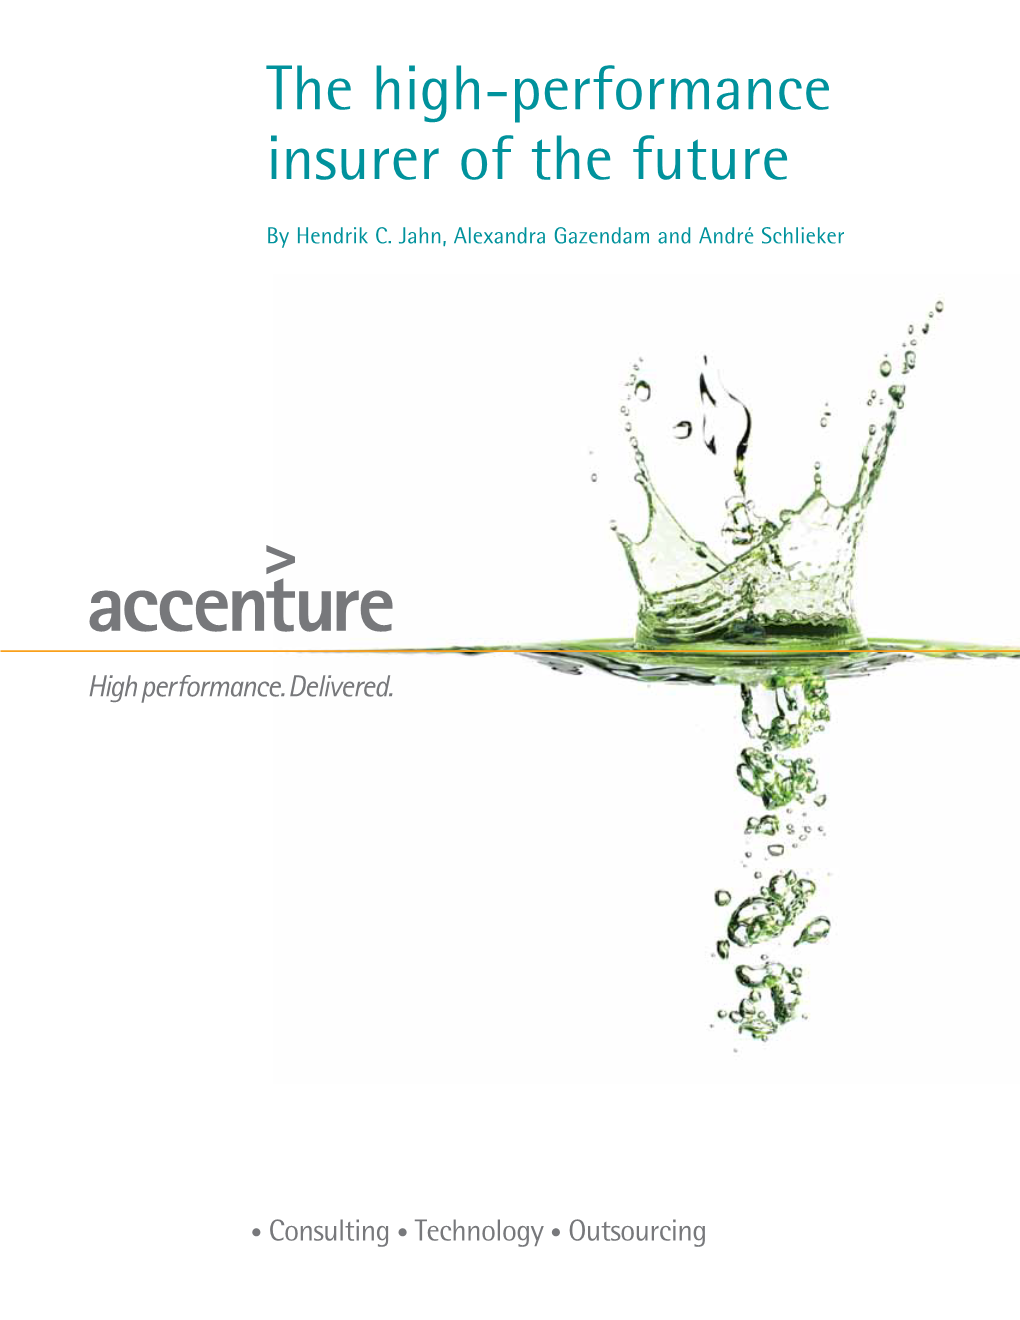 The High-Performance Insurer of the Future